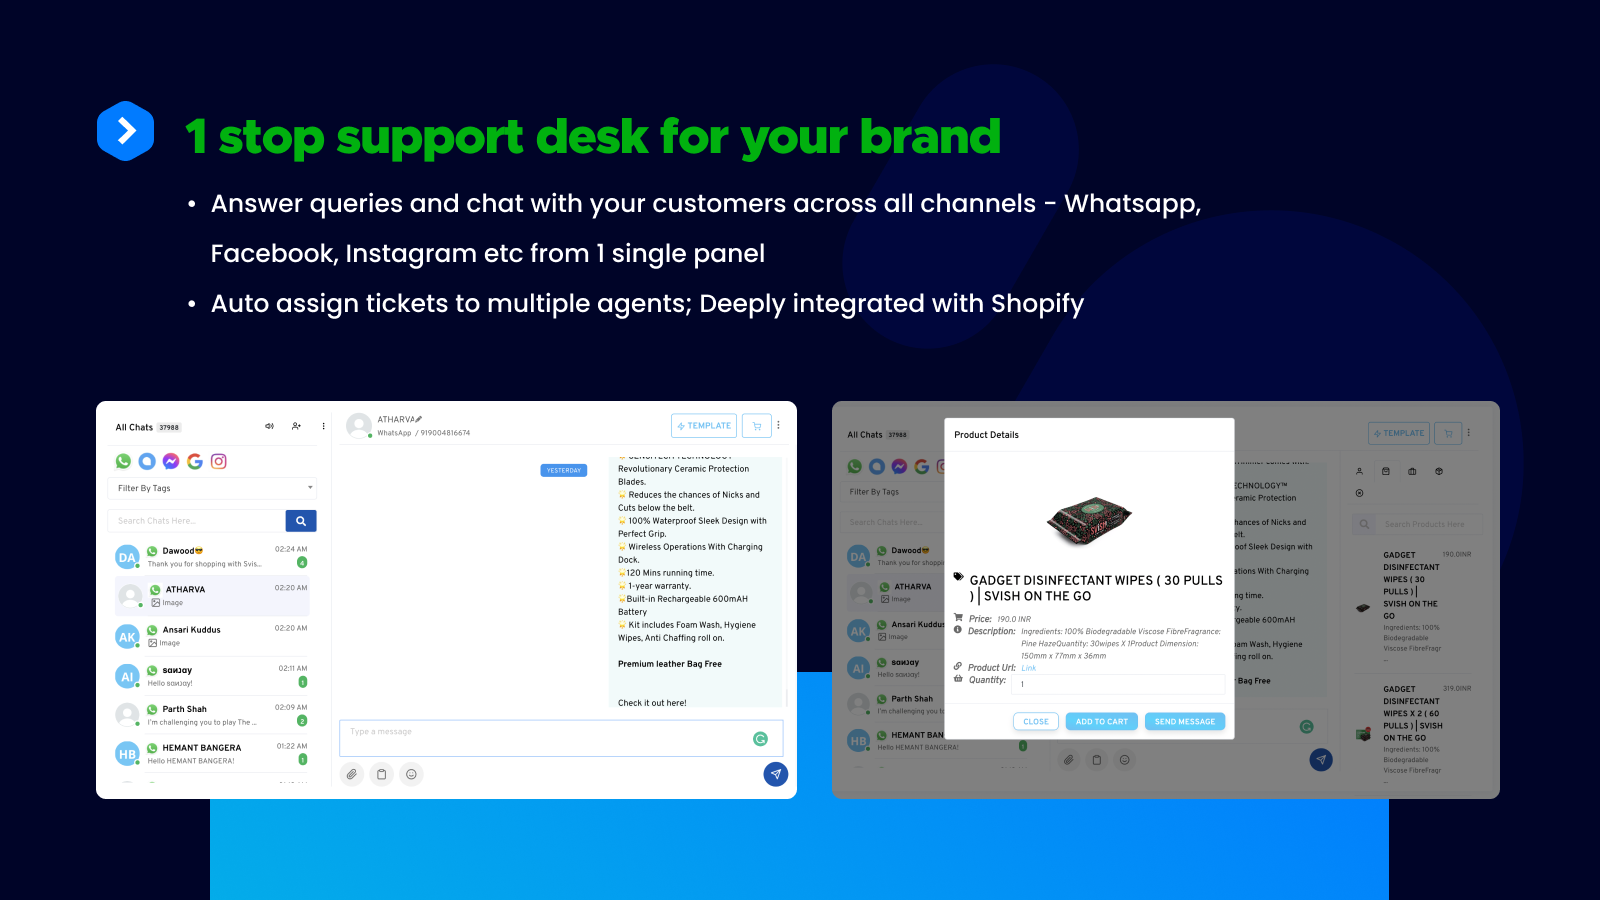 1 stop support desk for your brand